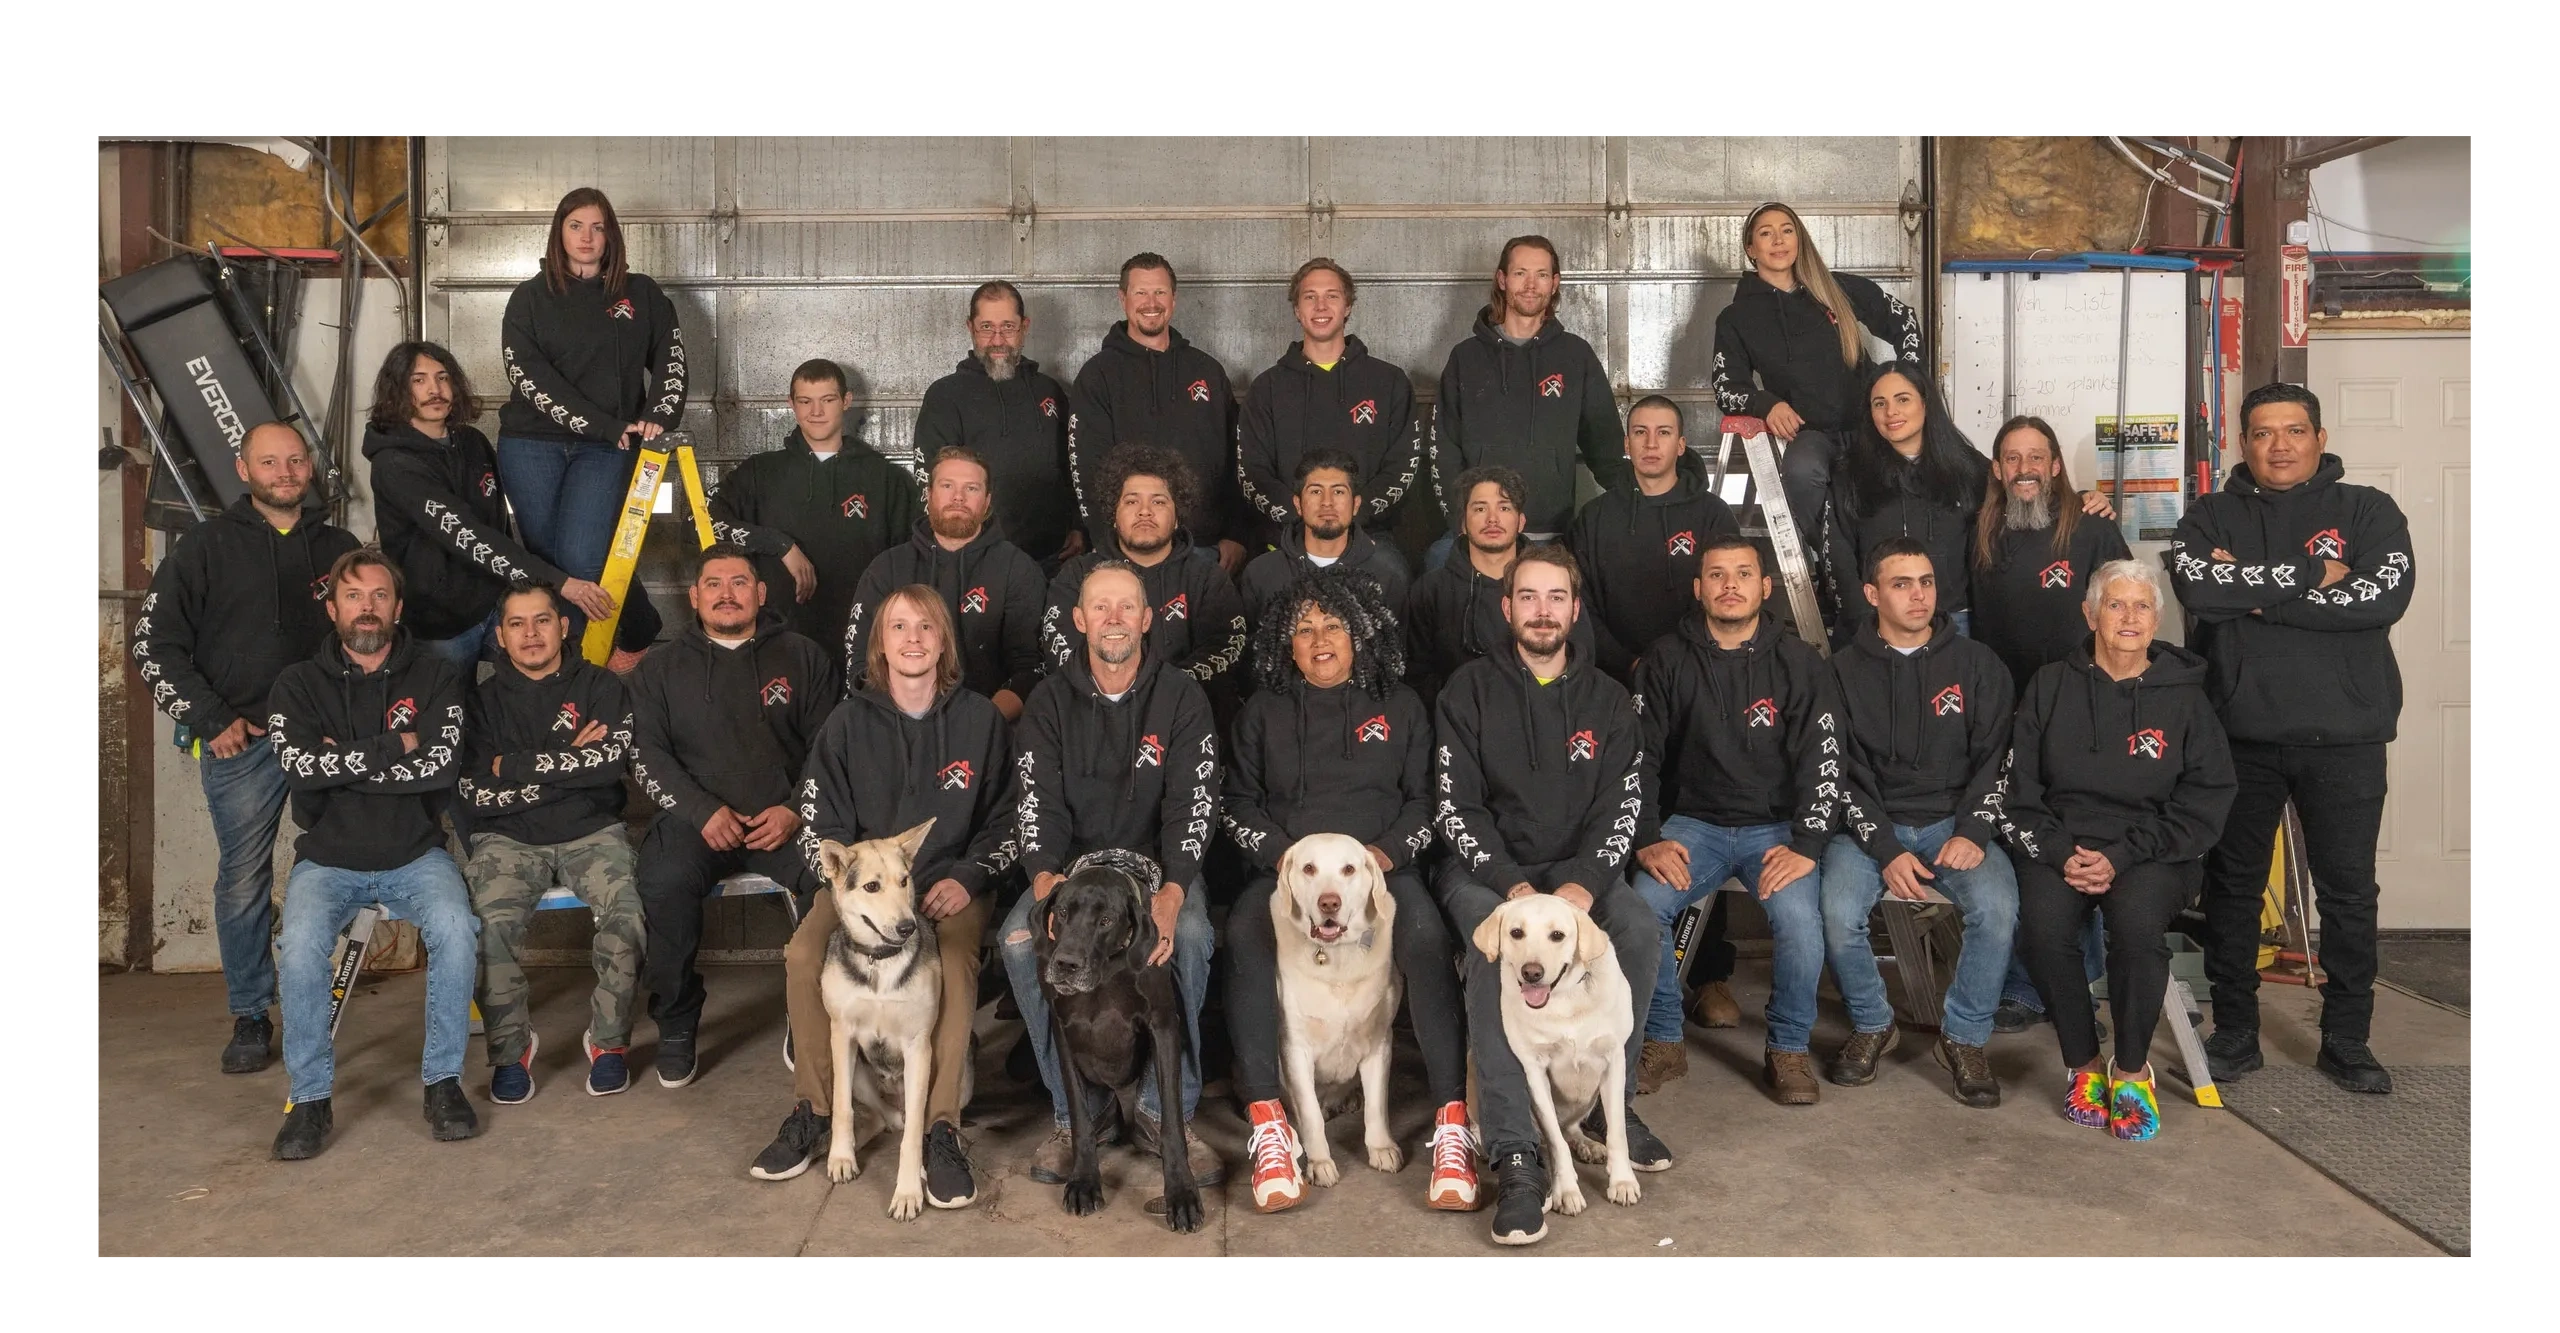 Park City Handyman Services Team photo Plumbing Electrical Carpentry Drywall Painting Repair 